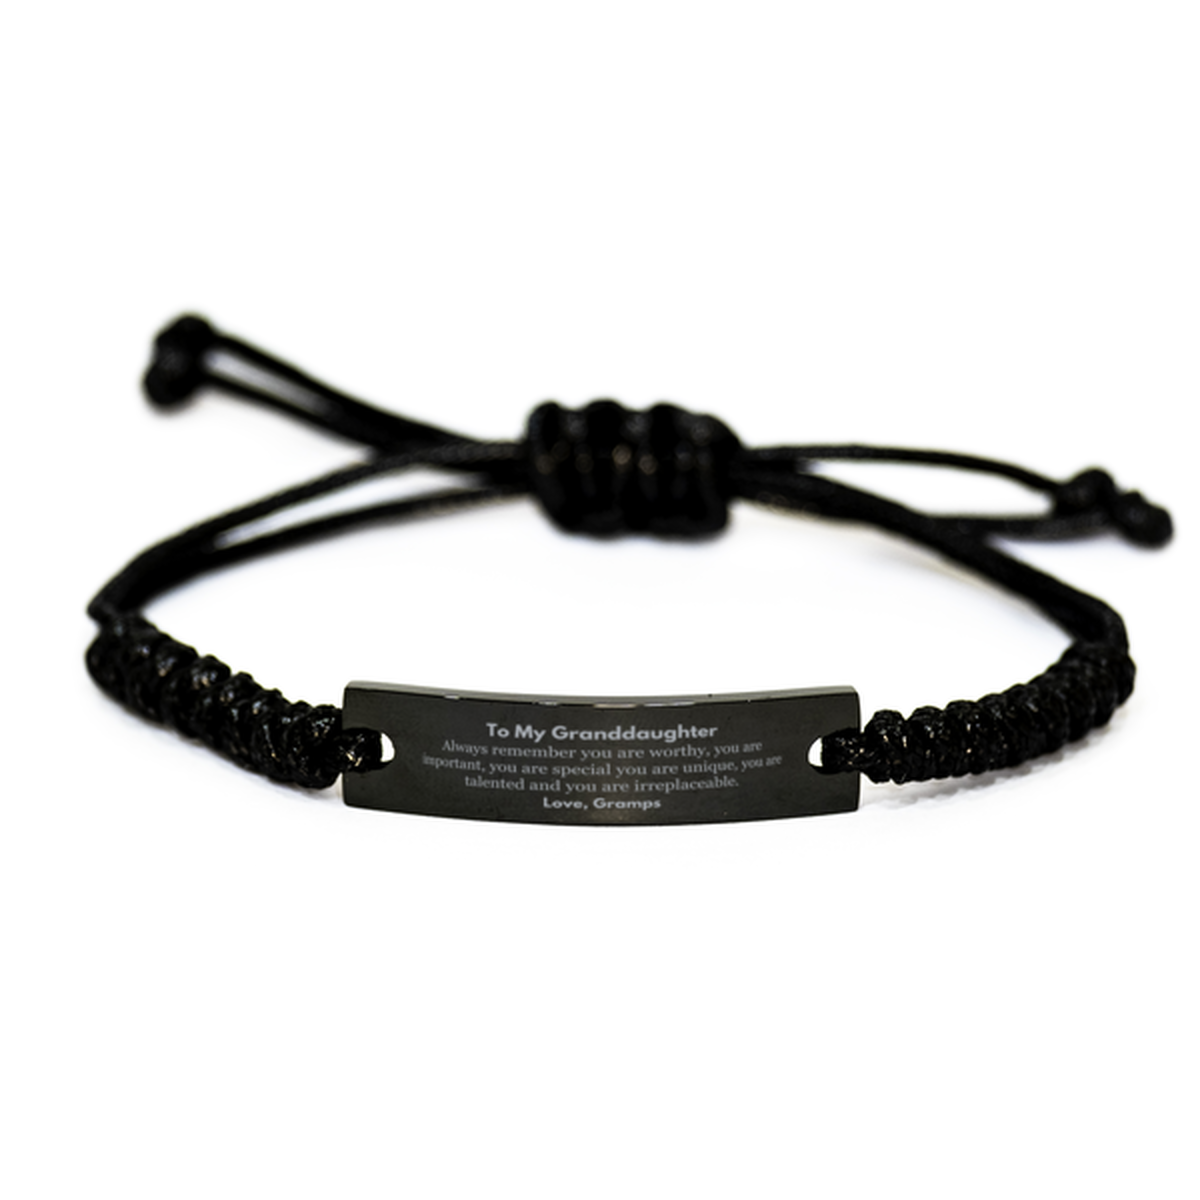 Granddaughter Birthday Gifts from Gramps, Inspirational Black Rope Bracelet for Granddaughter Christmas Graduation Gifts for Granddaughter Always remember you are worthy, you are important. Love, Gramps